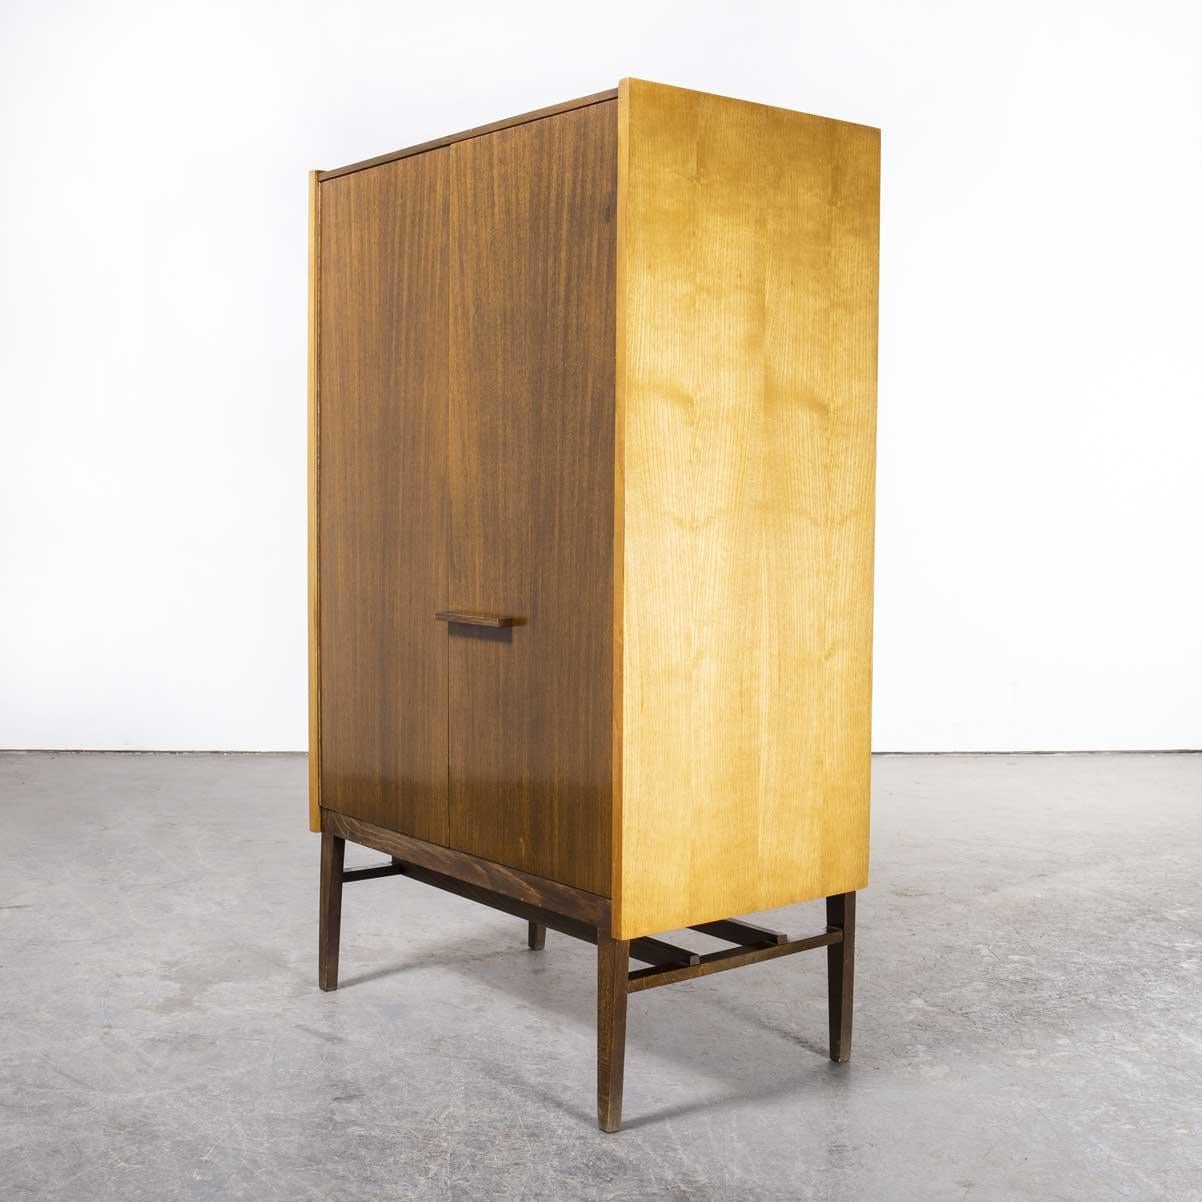 1960’s Two Door Large Mid Century Cabinet – Up Zavody
1960’s Two Door Large Mid Century Cabinet – Up Zavody. Superb practical piece of mid century storage by the Czech maker Up Zavody. Czech was a large producer of high quality mid century